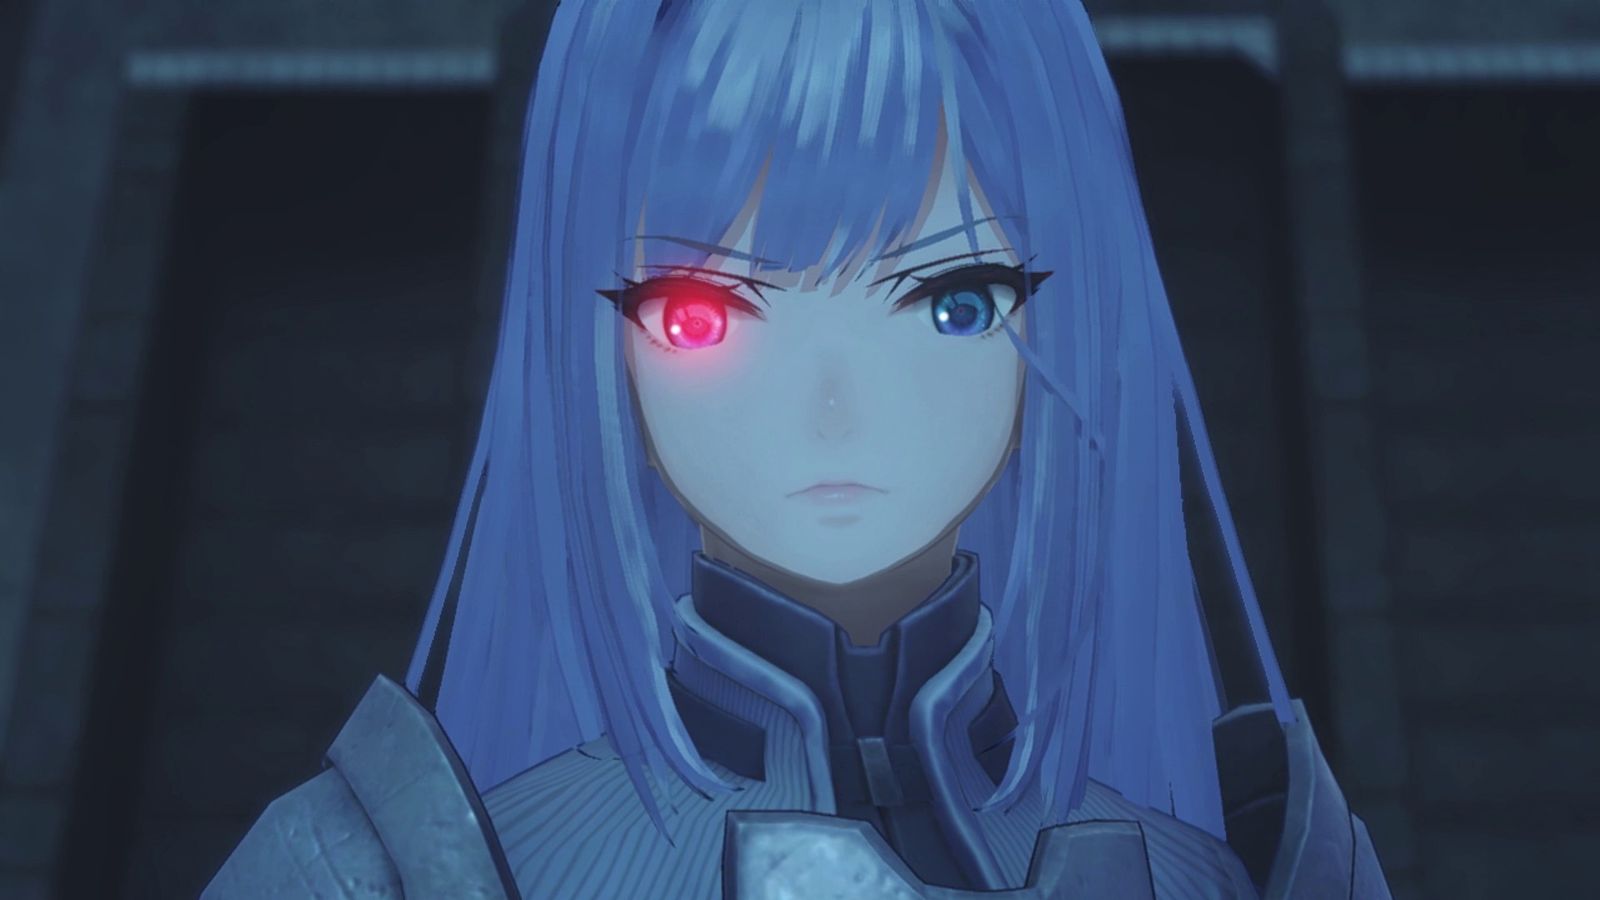 Image of a character with a cybernetic eye in Xenoblade Chronicles 3